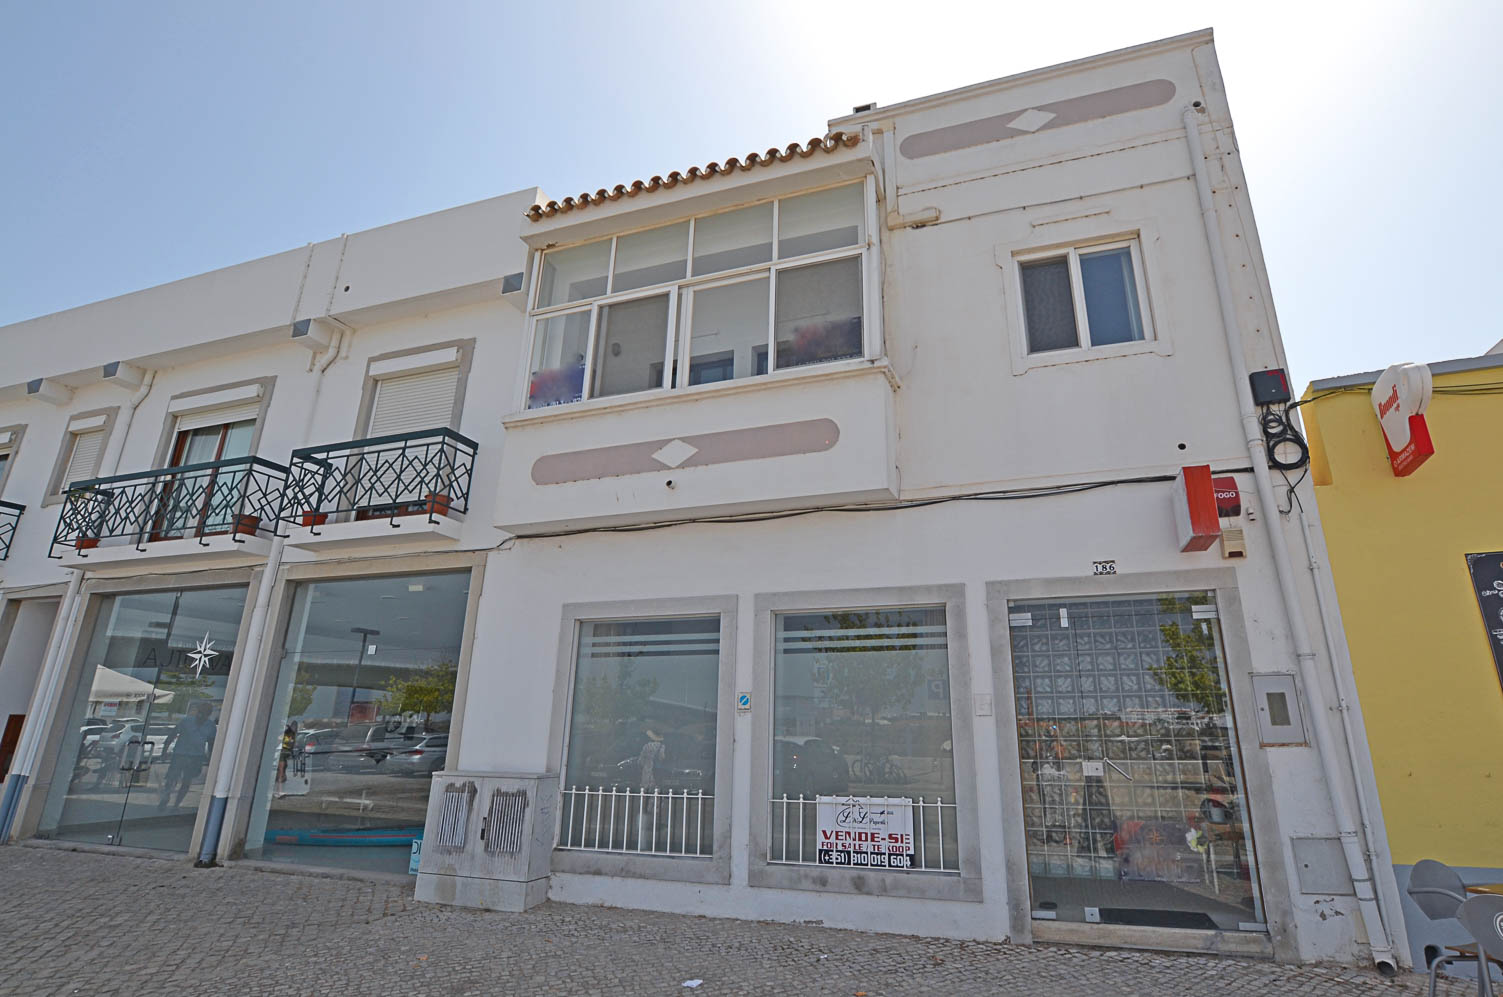 River Front Townhouse with two Apartments and Commercial Space, Tavira